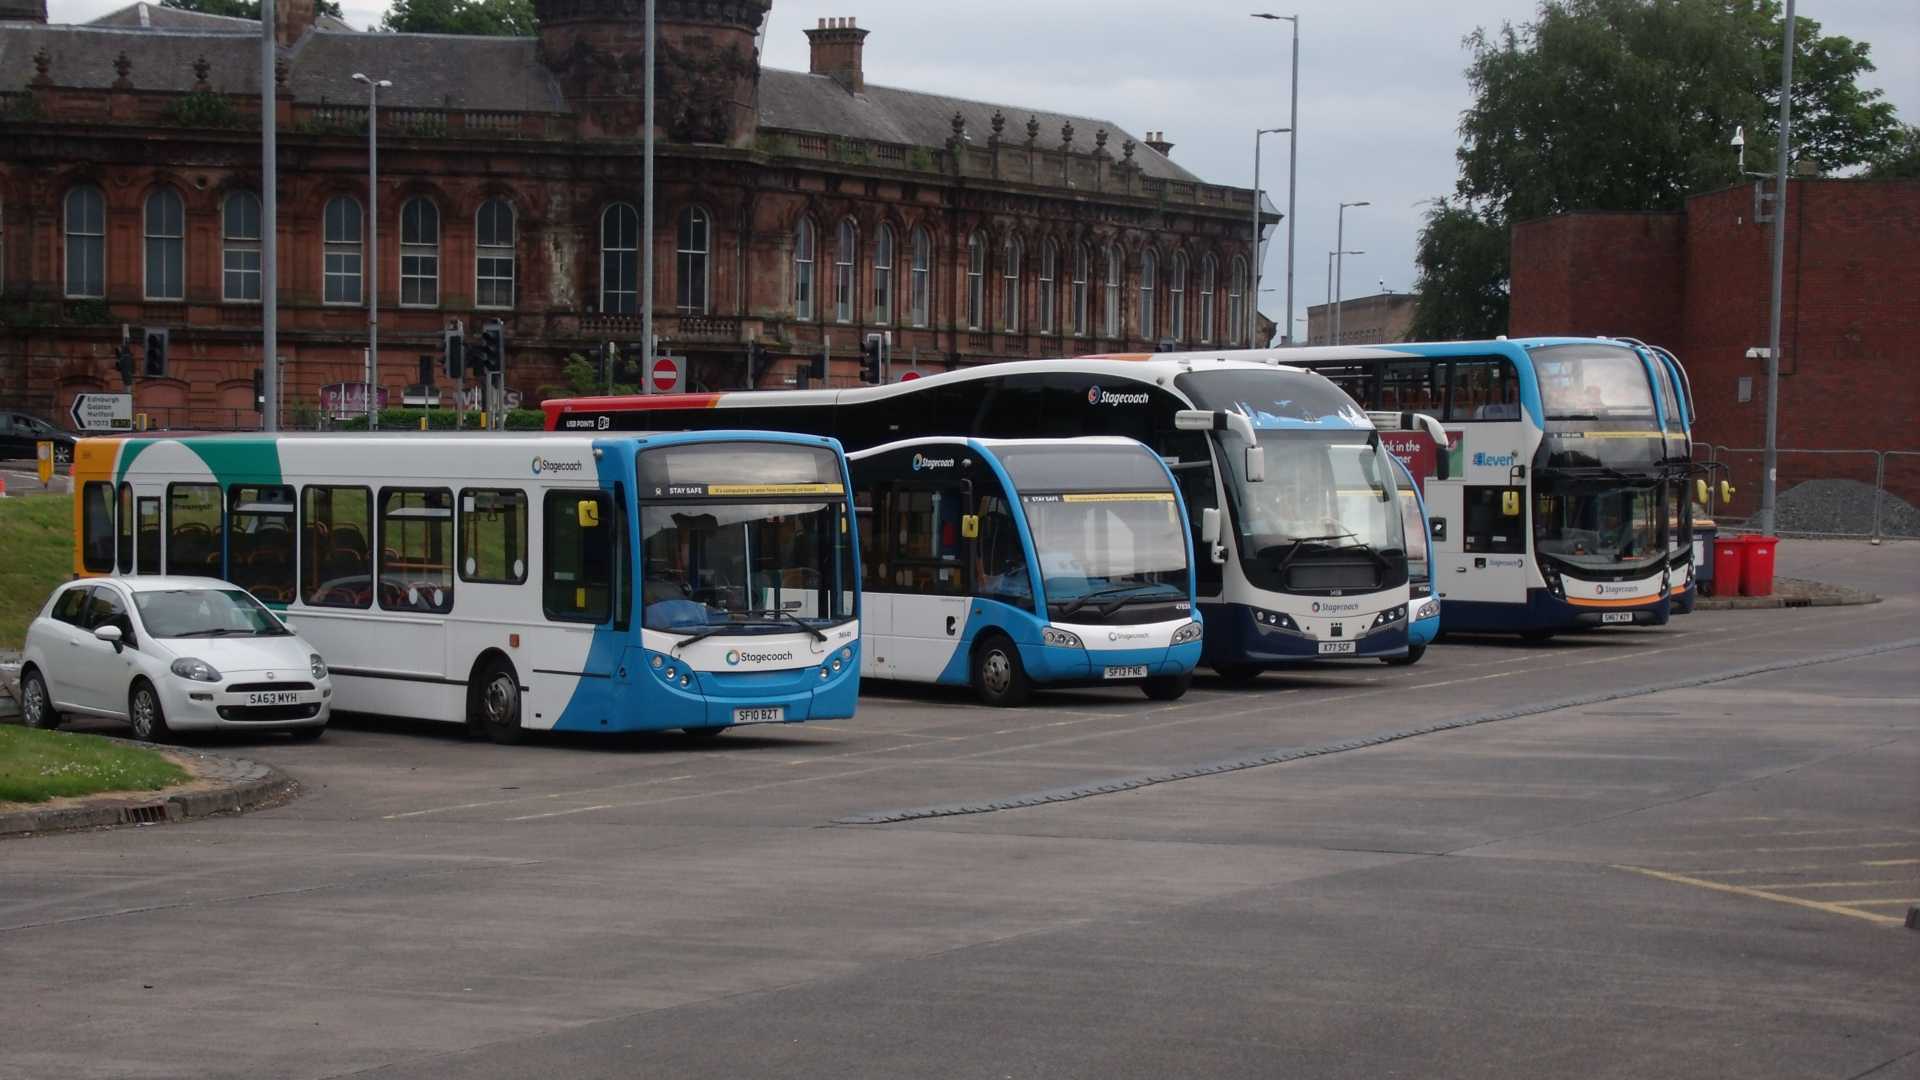 Small variety of Stagecoach buses at Kilmarnock